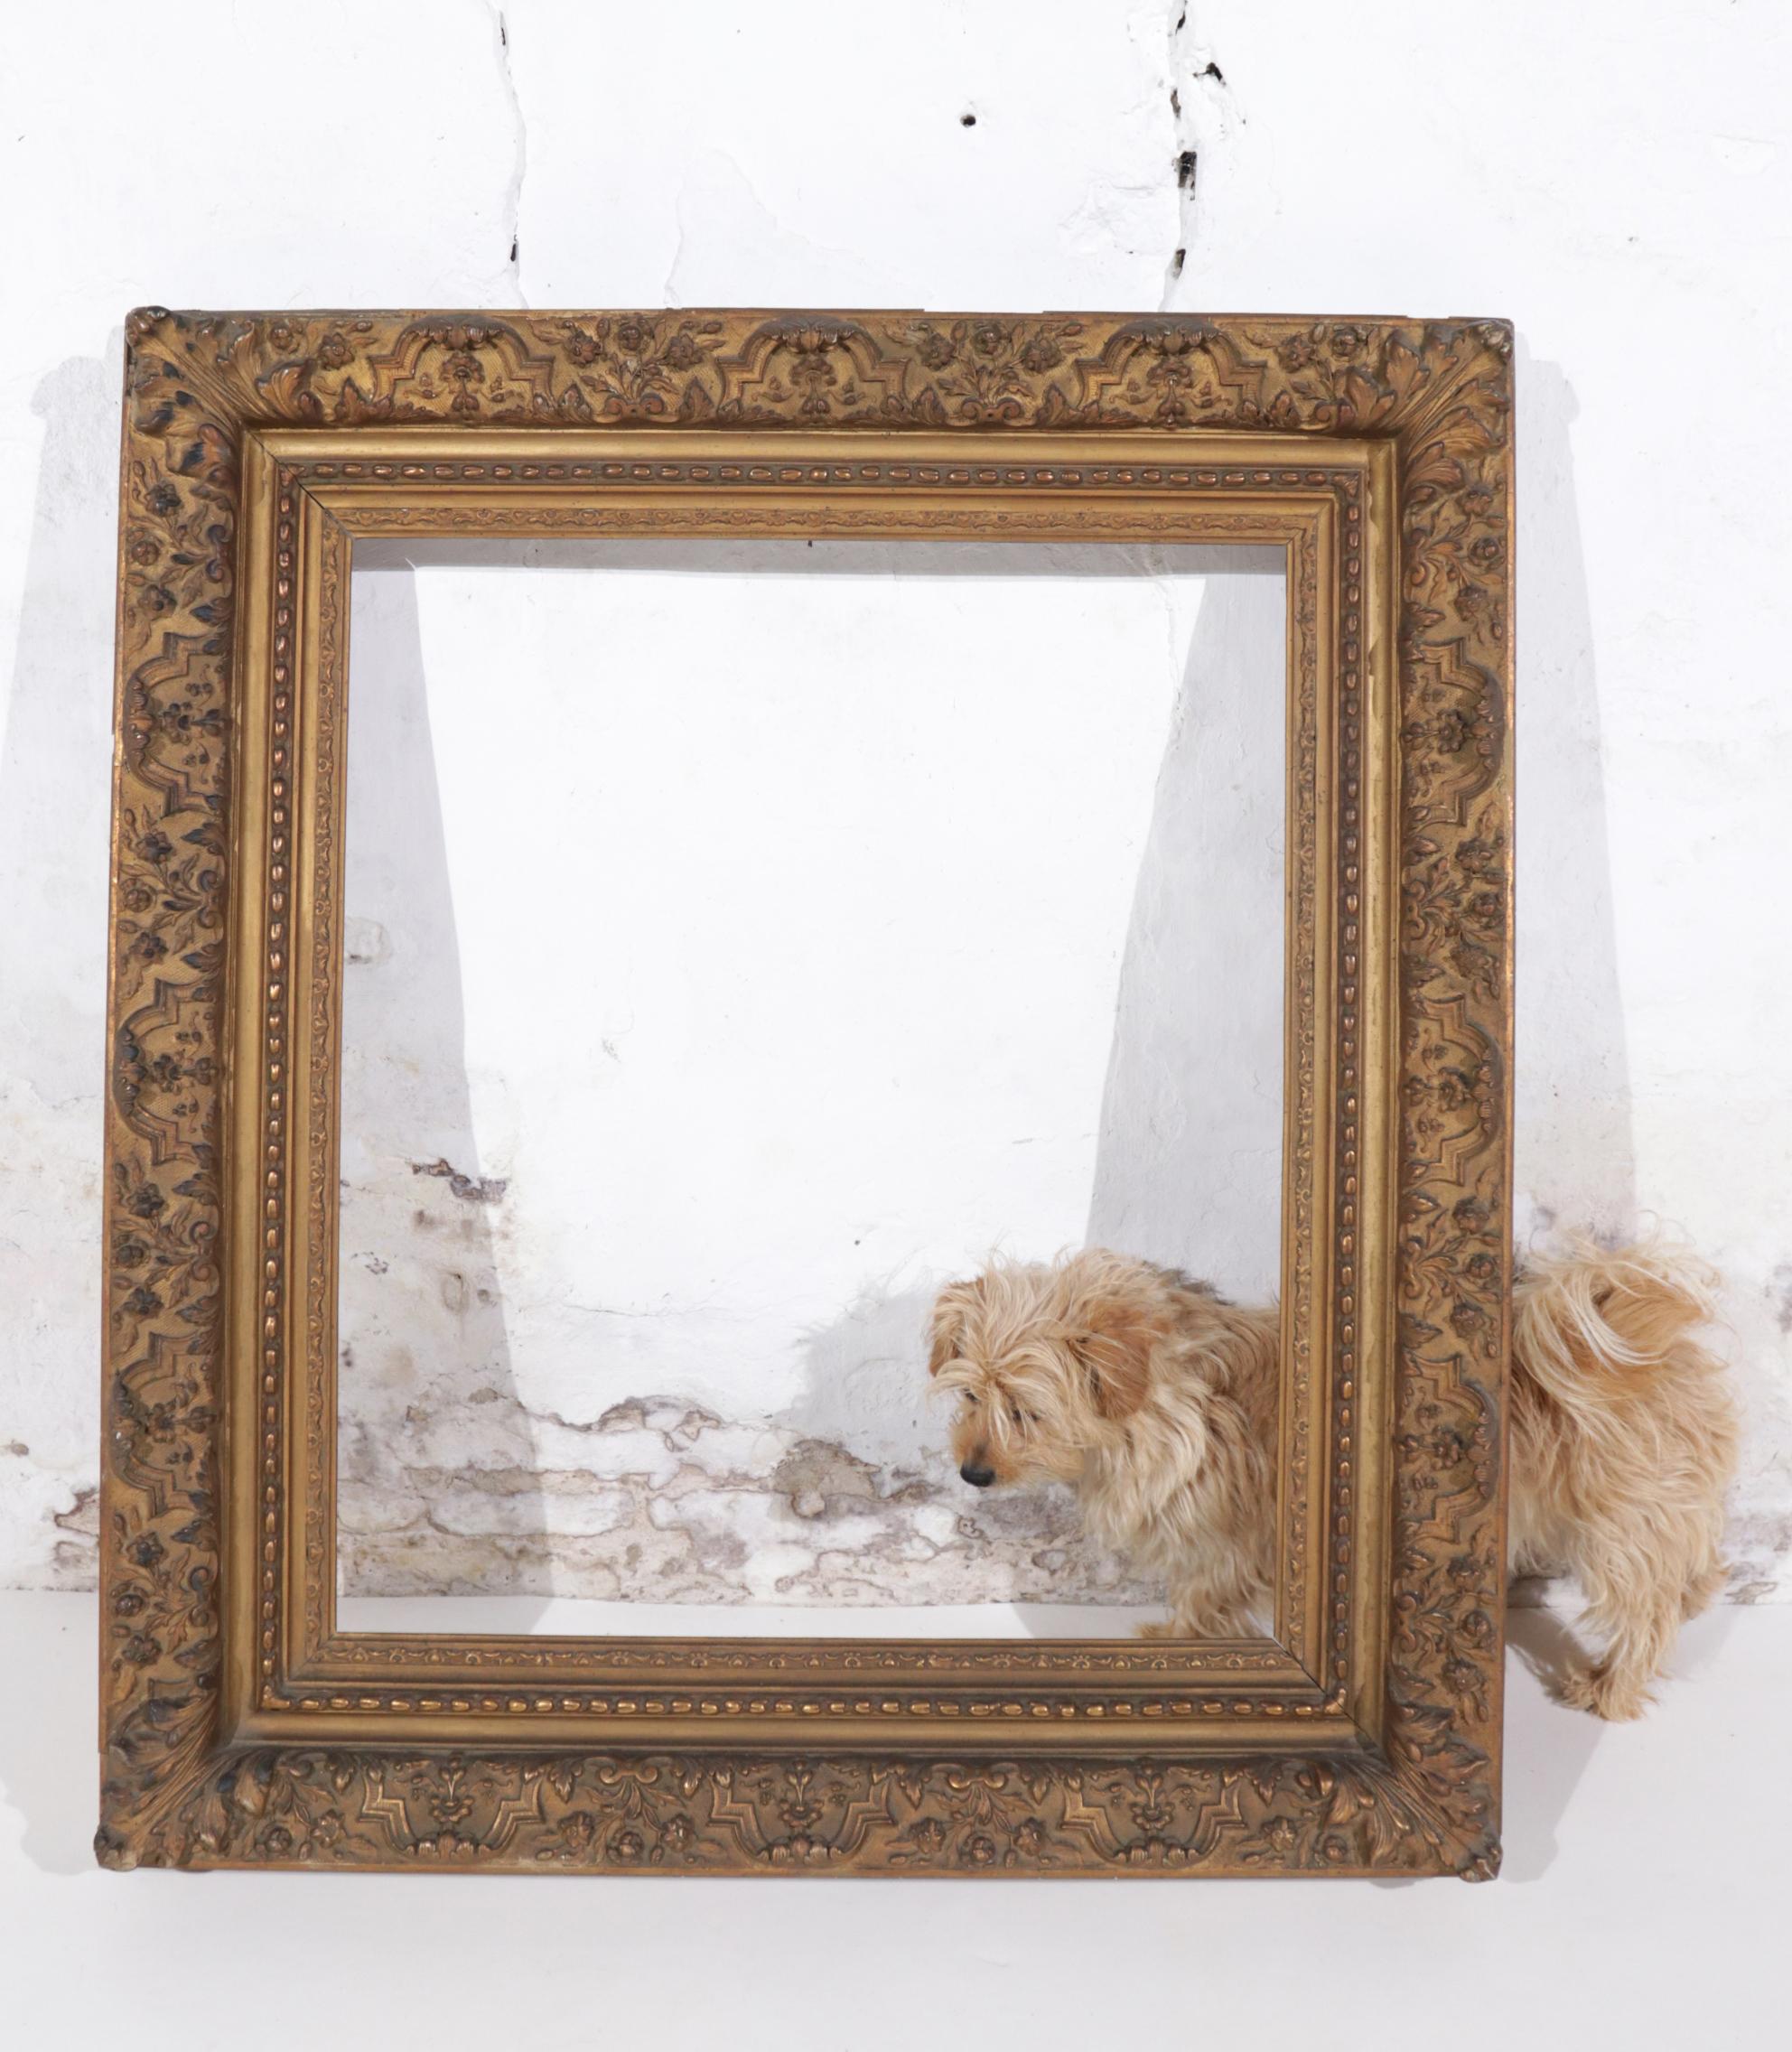 Large 19th Century Bronzed French Picture- or Art Presentation Frame.
Heavy and in a very nice condition with beautiful antique appearance'.
Perfect to frame art but also as a mirror frame.

Inside measurements 71 x 61 cm.